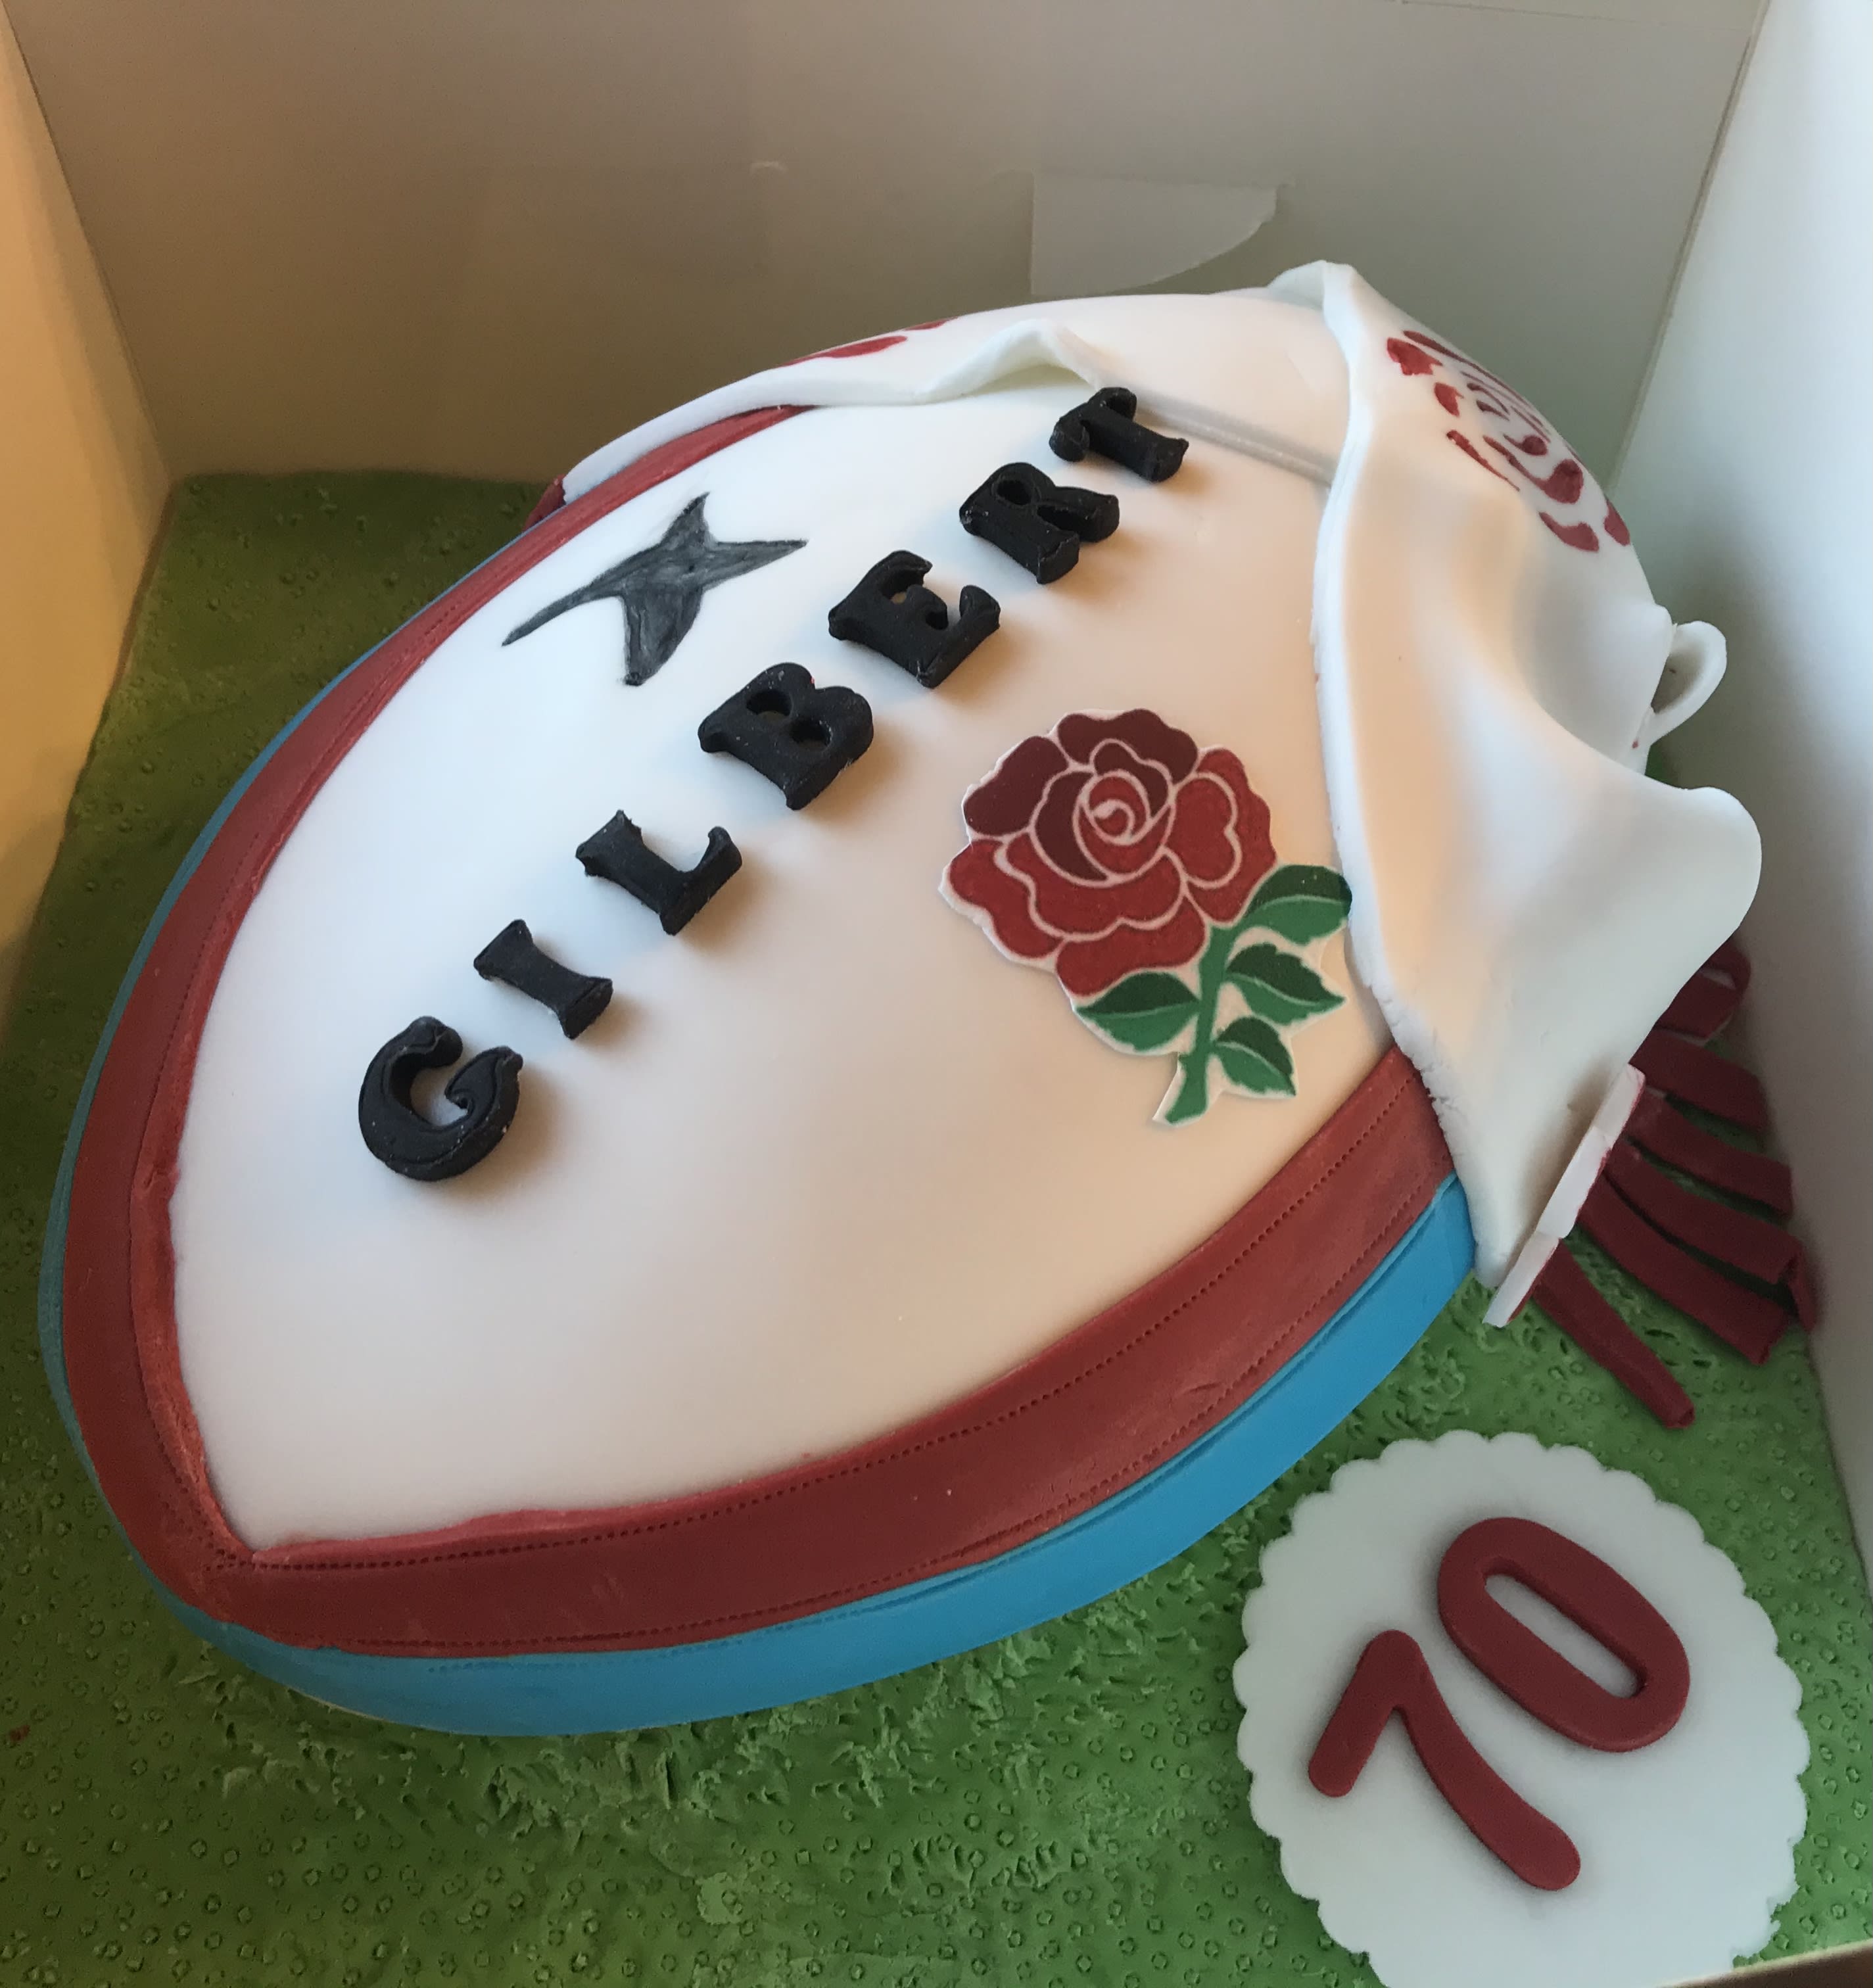 3D Rugby Ball Birthday Cake | Imaginative Icing - Cakes - Scarborough,  York, Malton, Leeds, Hull, Bridlington, Whitby, Filey, and across the UK